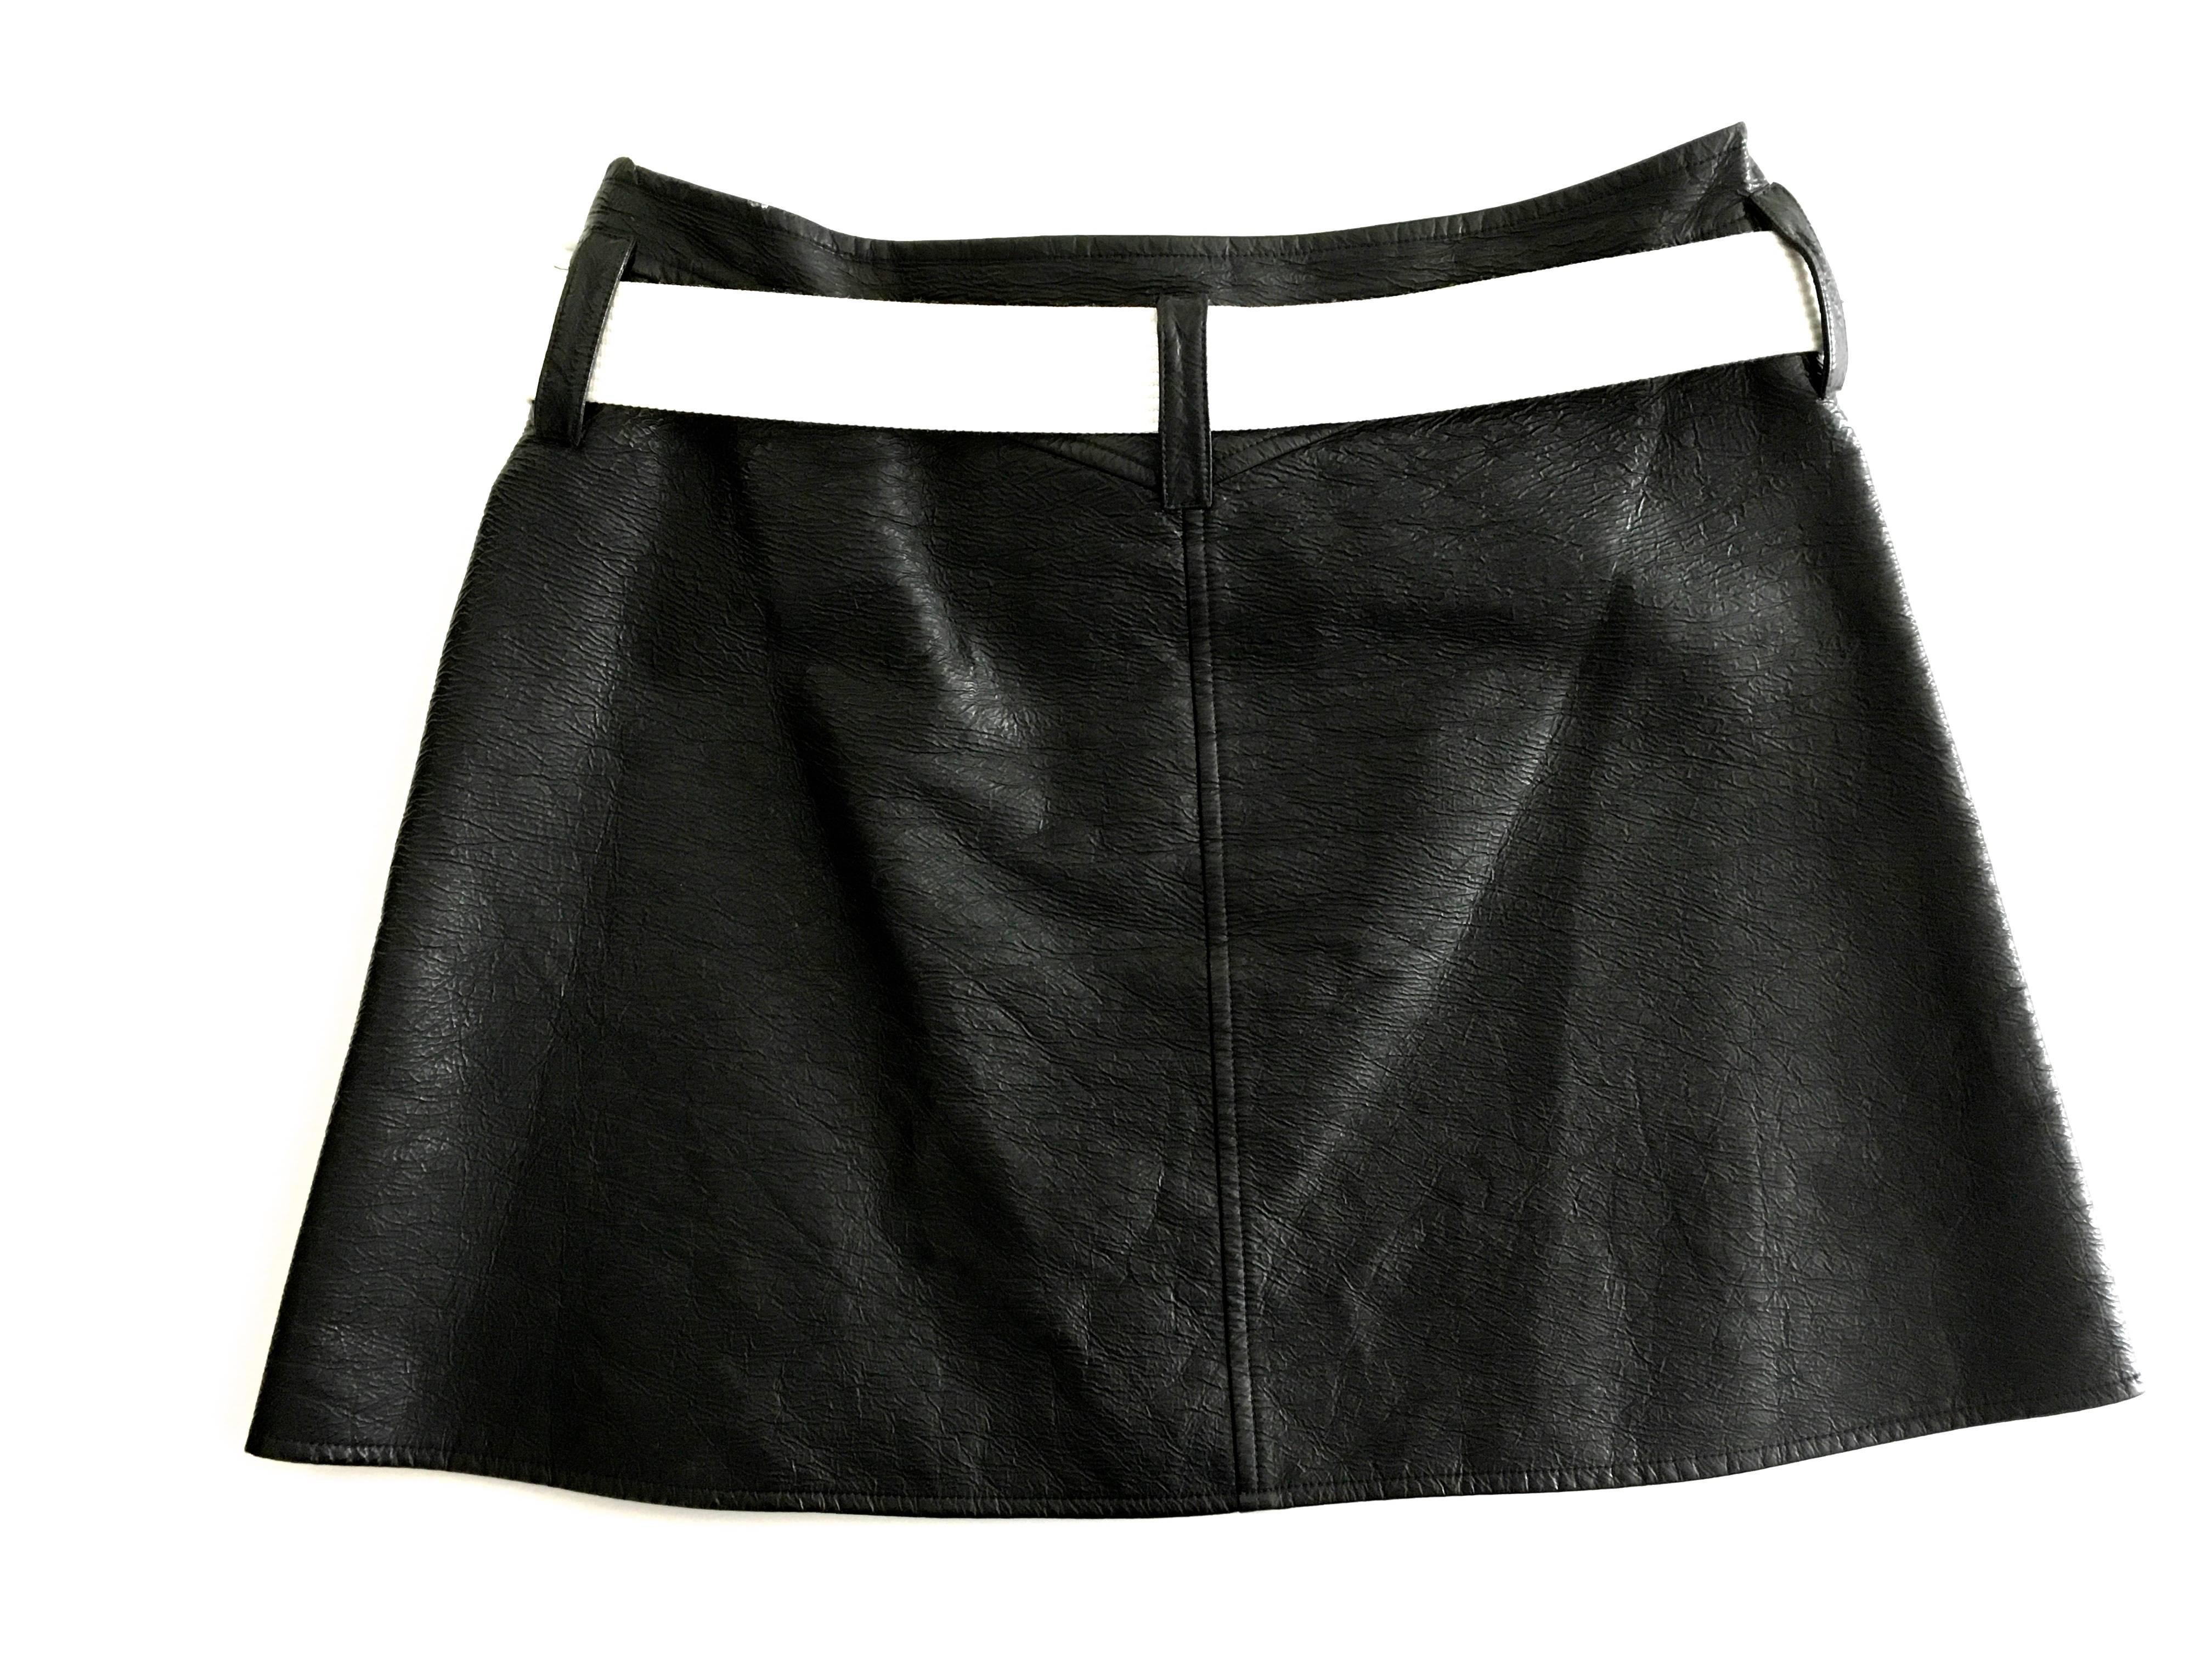 Courreges Skirt - Size Medium In Excellent Condition For Sale In Boca Raton, FL